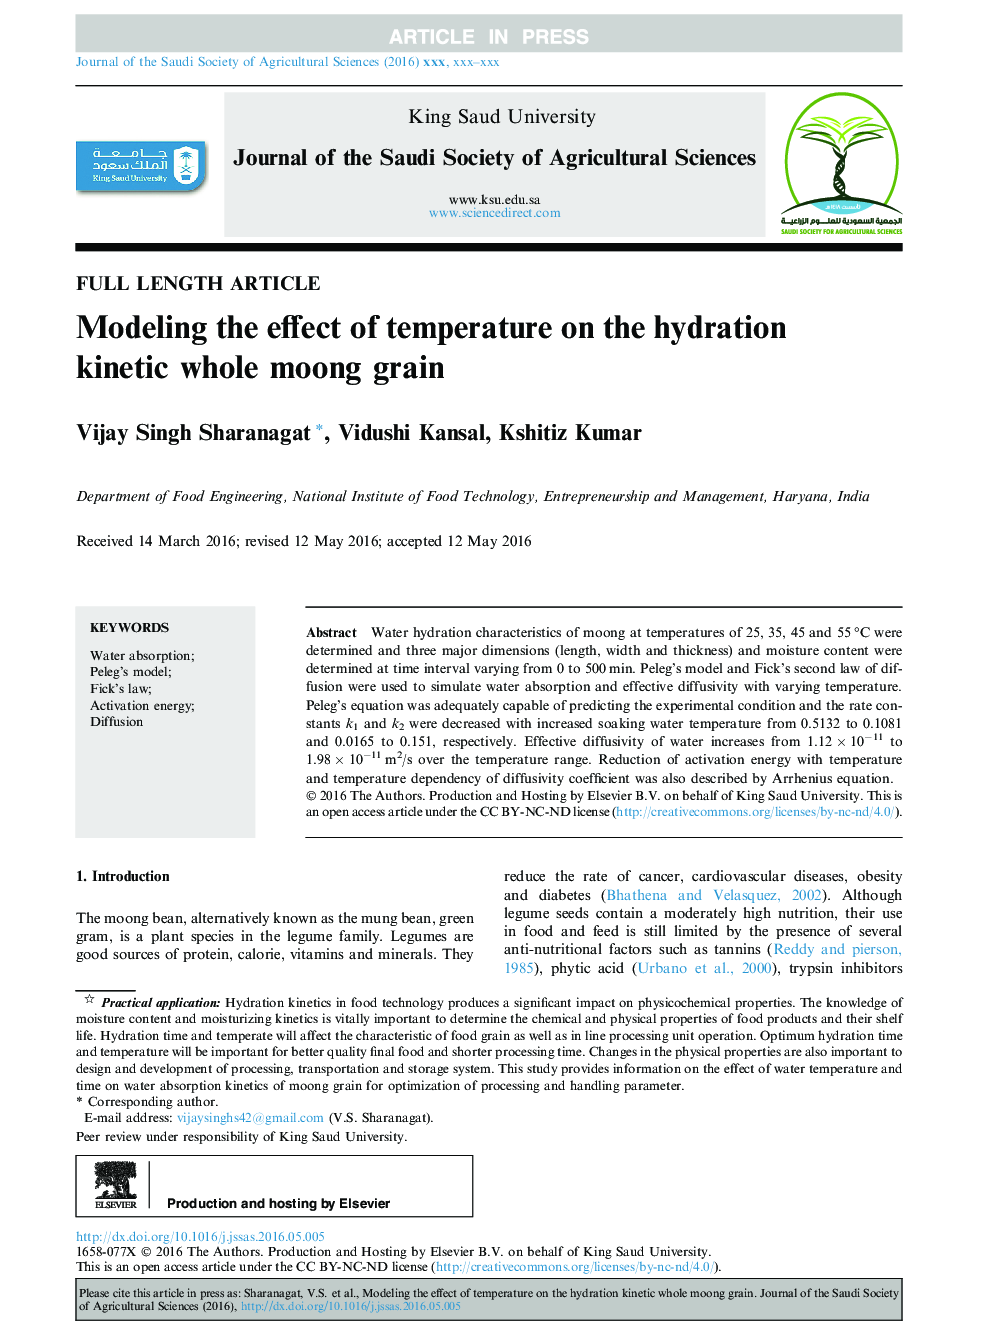 Modeling the effect of temperature on the hydration kinetic whole moong grain